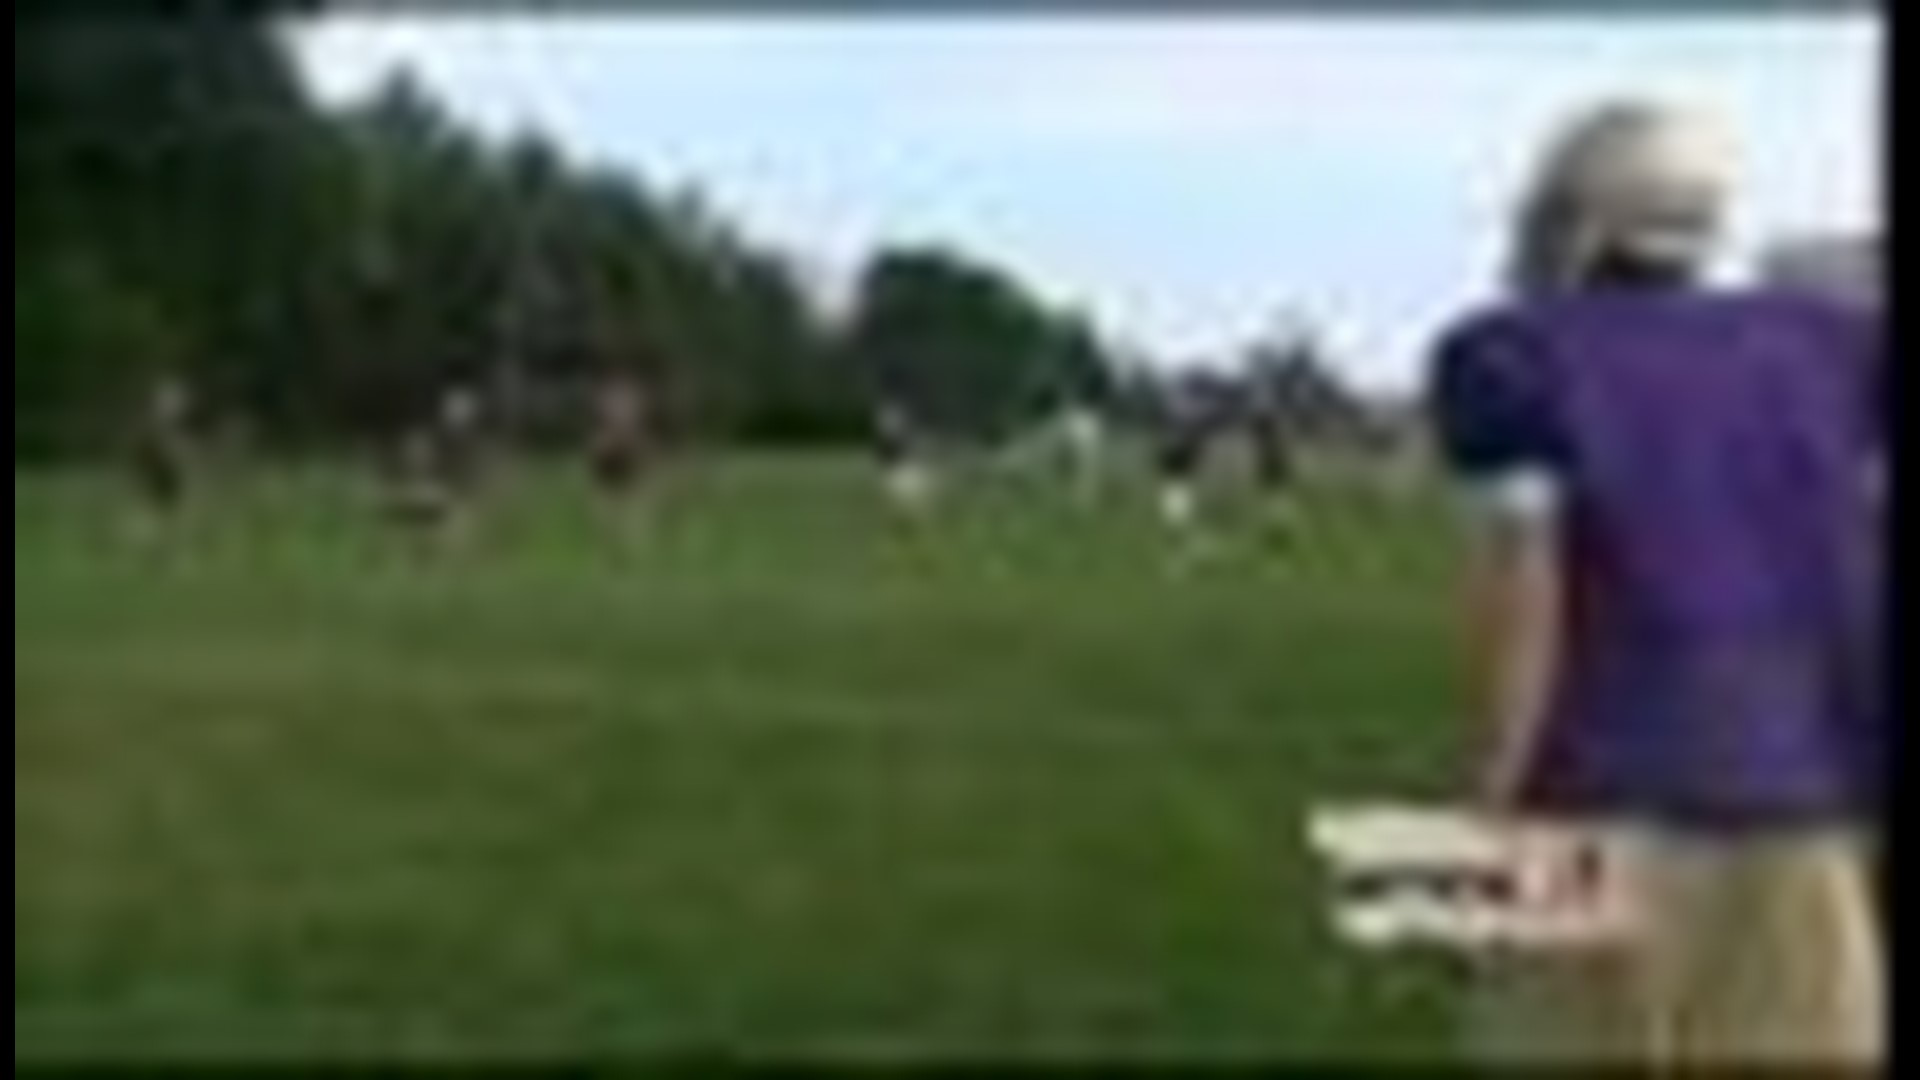 Maumee Panthers working hard for football season